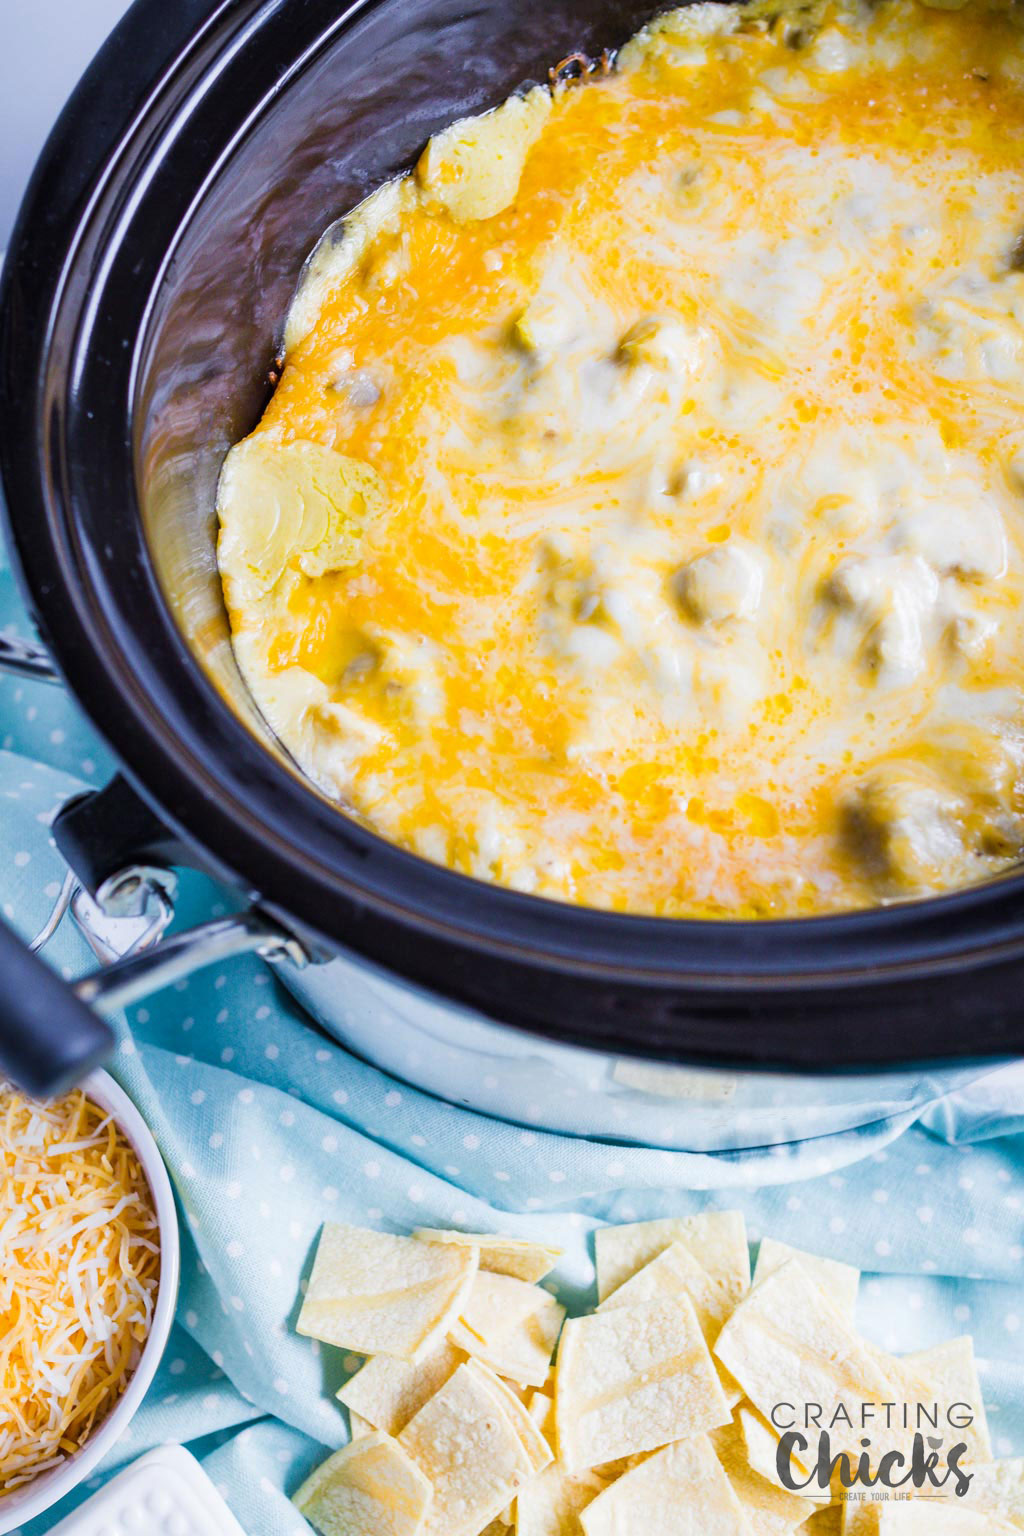 Crockpot Chicken Enchilada Casserole is easy but full of flavor. With green chilies and lots of cheese, this is a crowd pleaser that can feed a crowd.